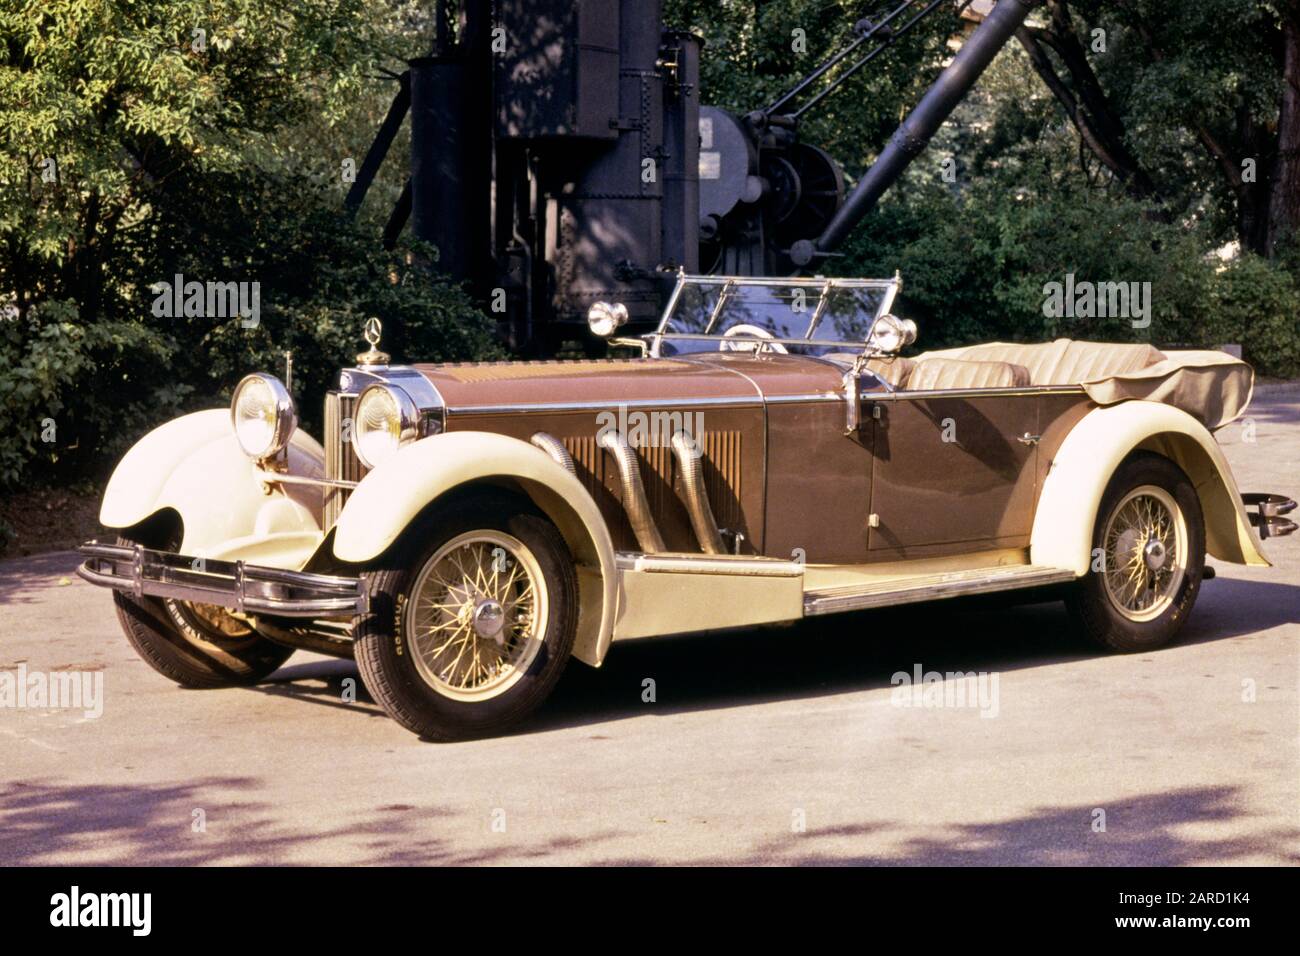 1920s 1928 MERCEDES-BENZ Typ S SPORT COUPE CONVERTIBLE TWO-TONE BEIGE AND BROWN - km6144 PHT001 HARS EXPENSIVE OLD FASHIONED RARE Stock Photo